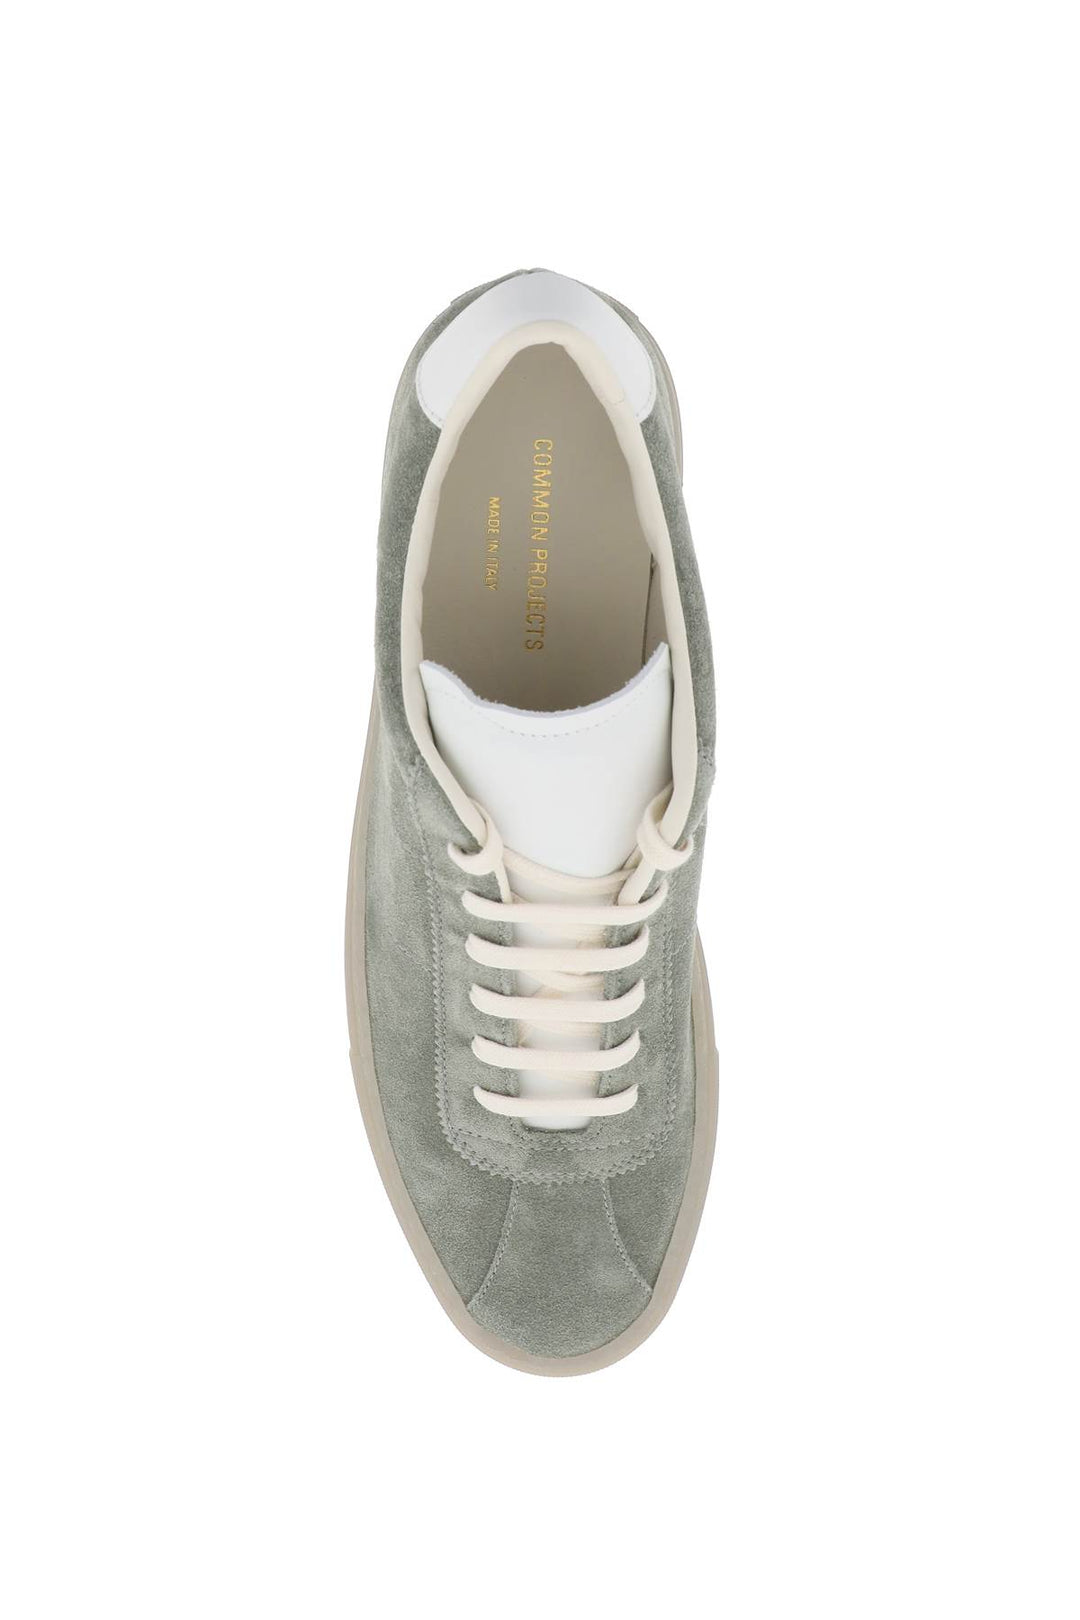 Common Projects Tennis 70 Sne   Green